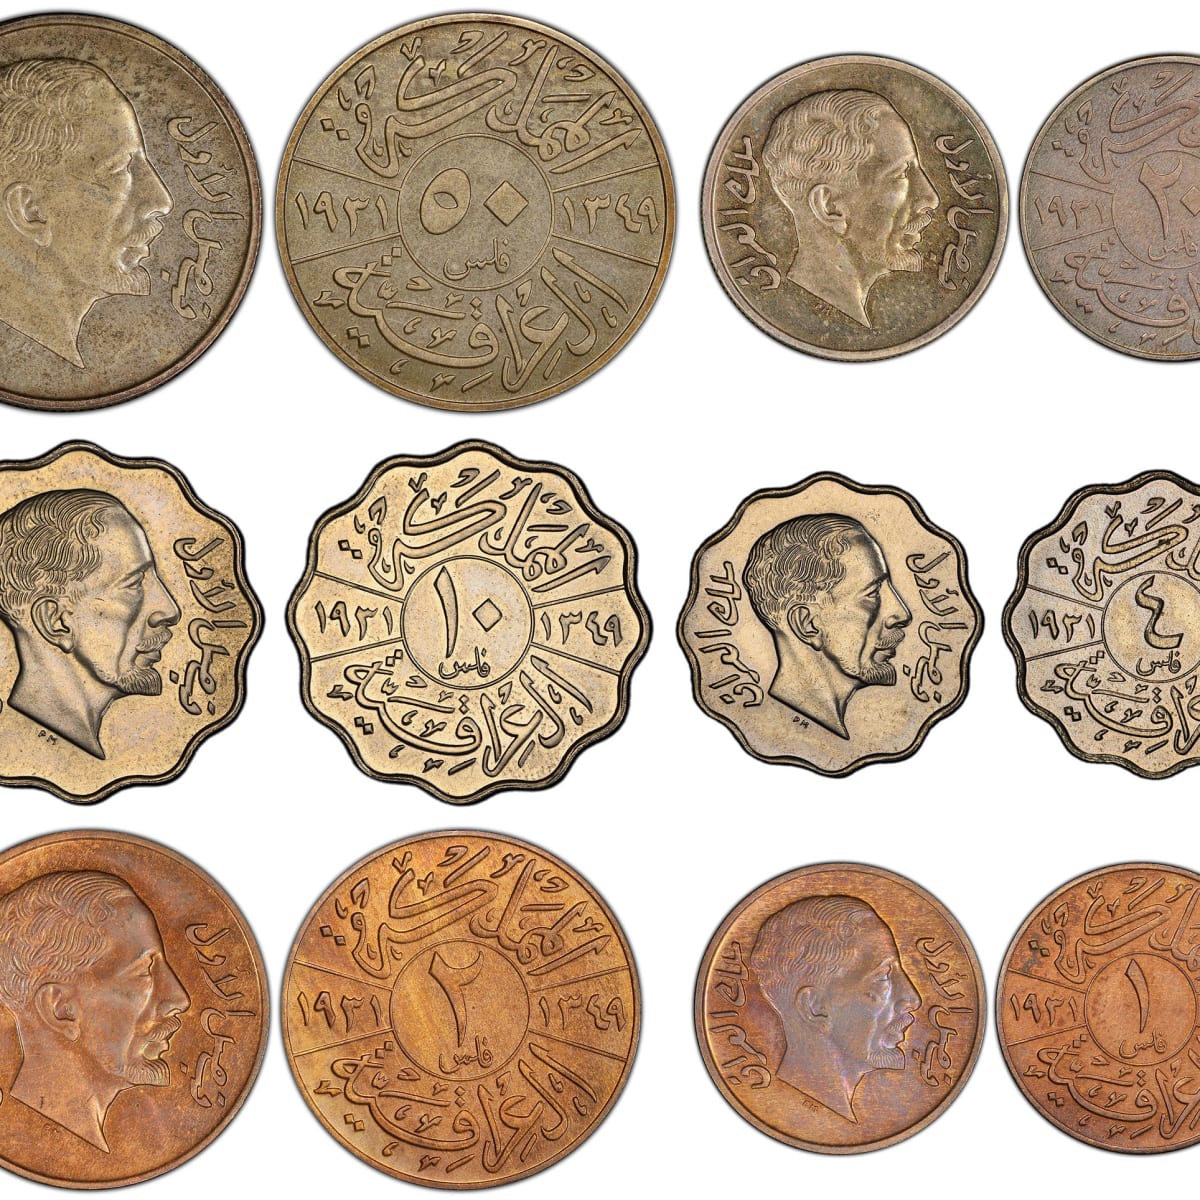 Stephen Album Rare Coins to hold its Auction 47 on September 14-17